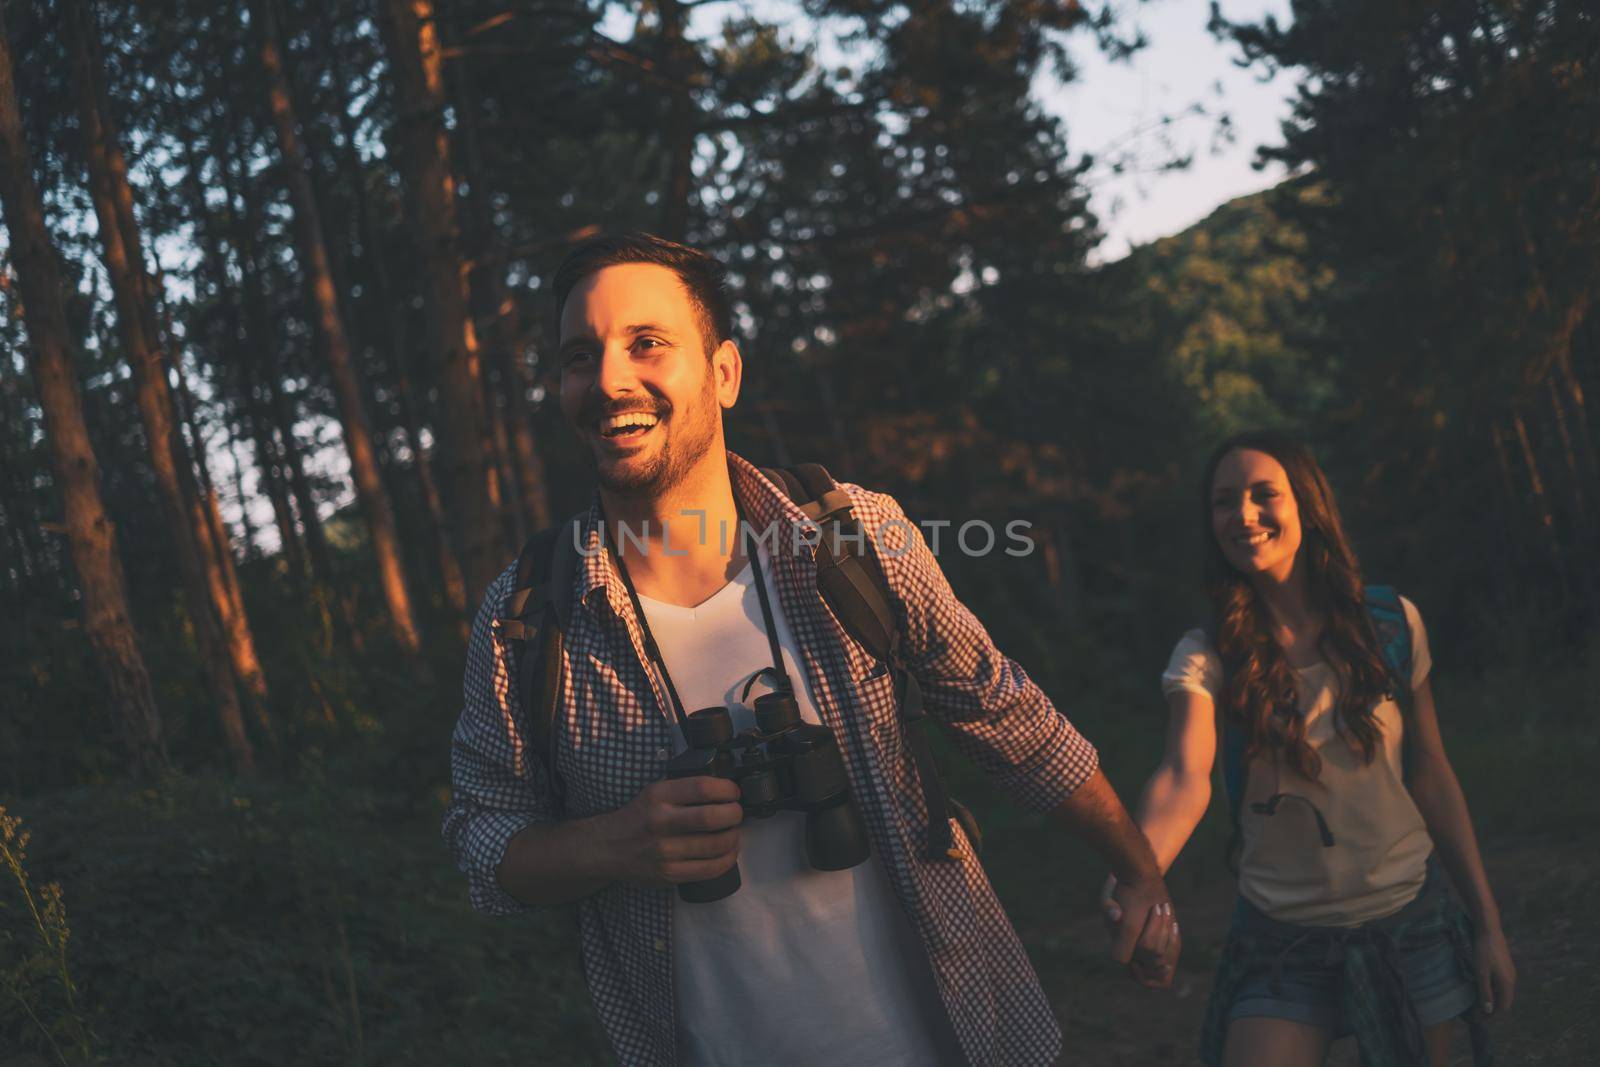 Happy couple is hiking in forest in summertime.